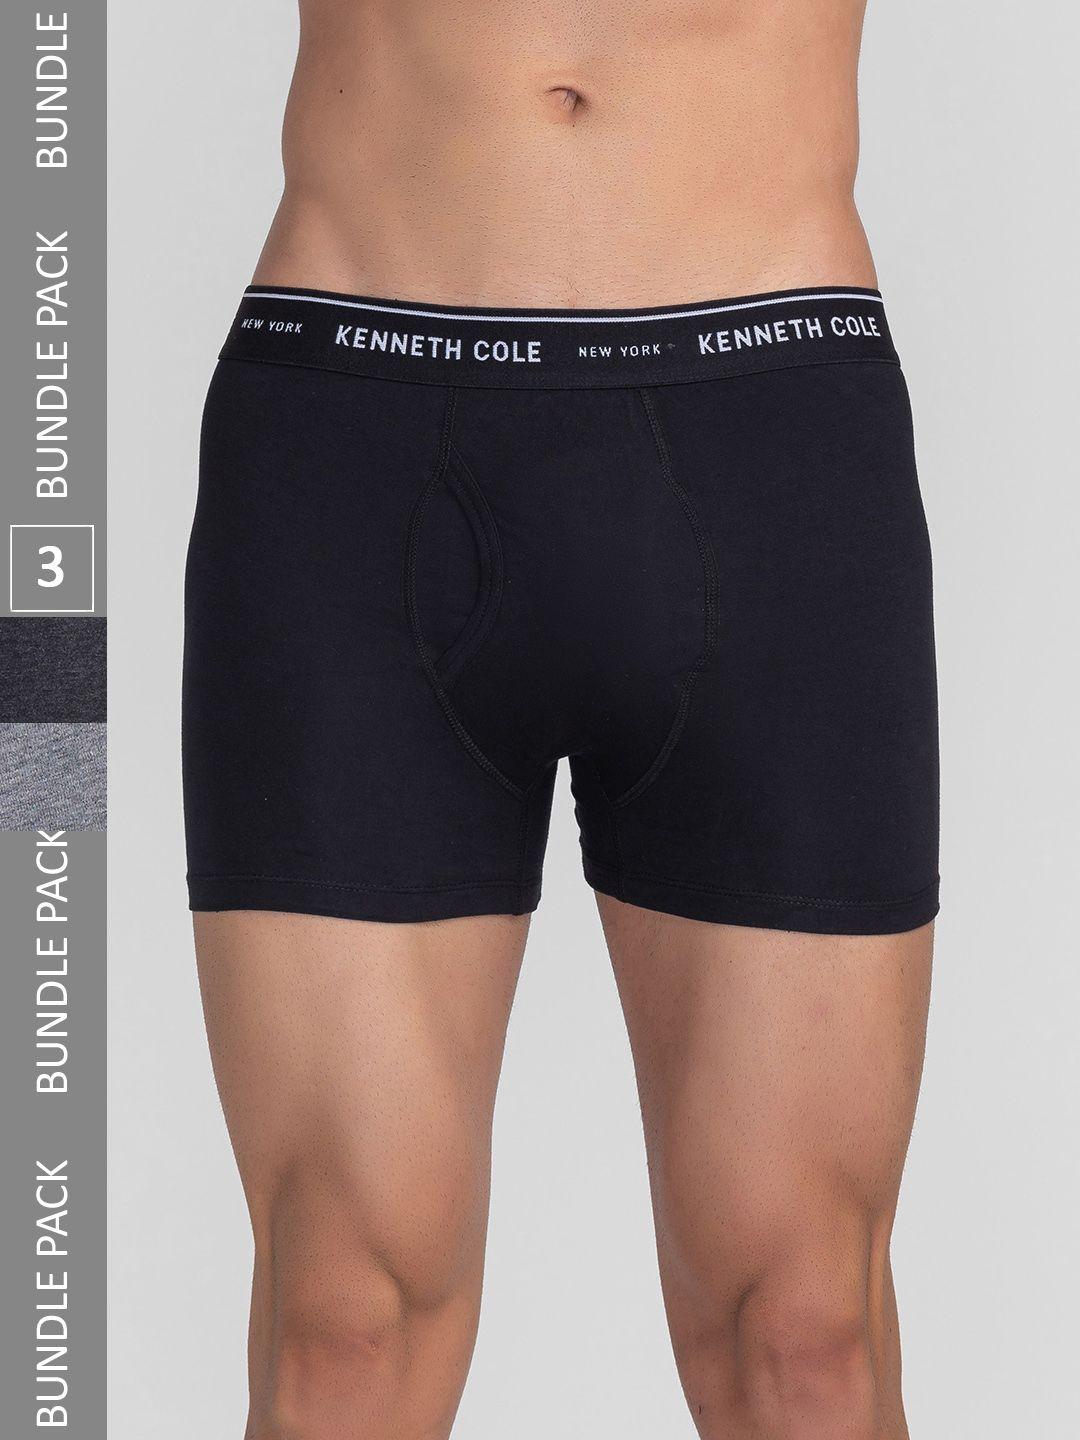 kenneth cole men pack of 3 brand name printed detail cotton trunks